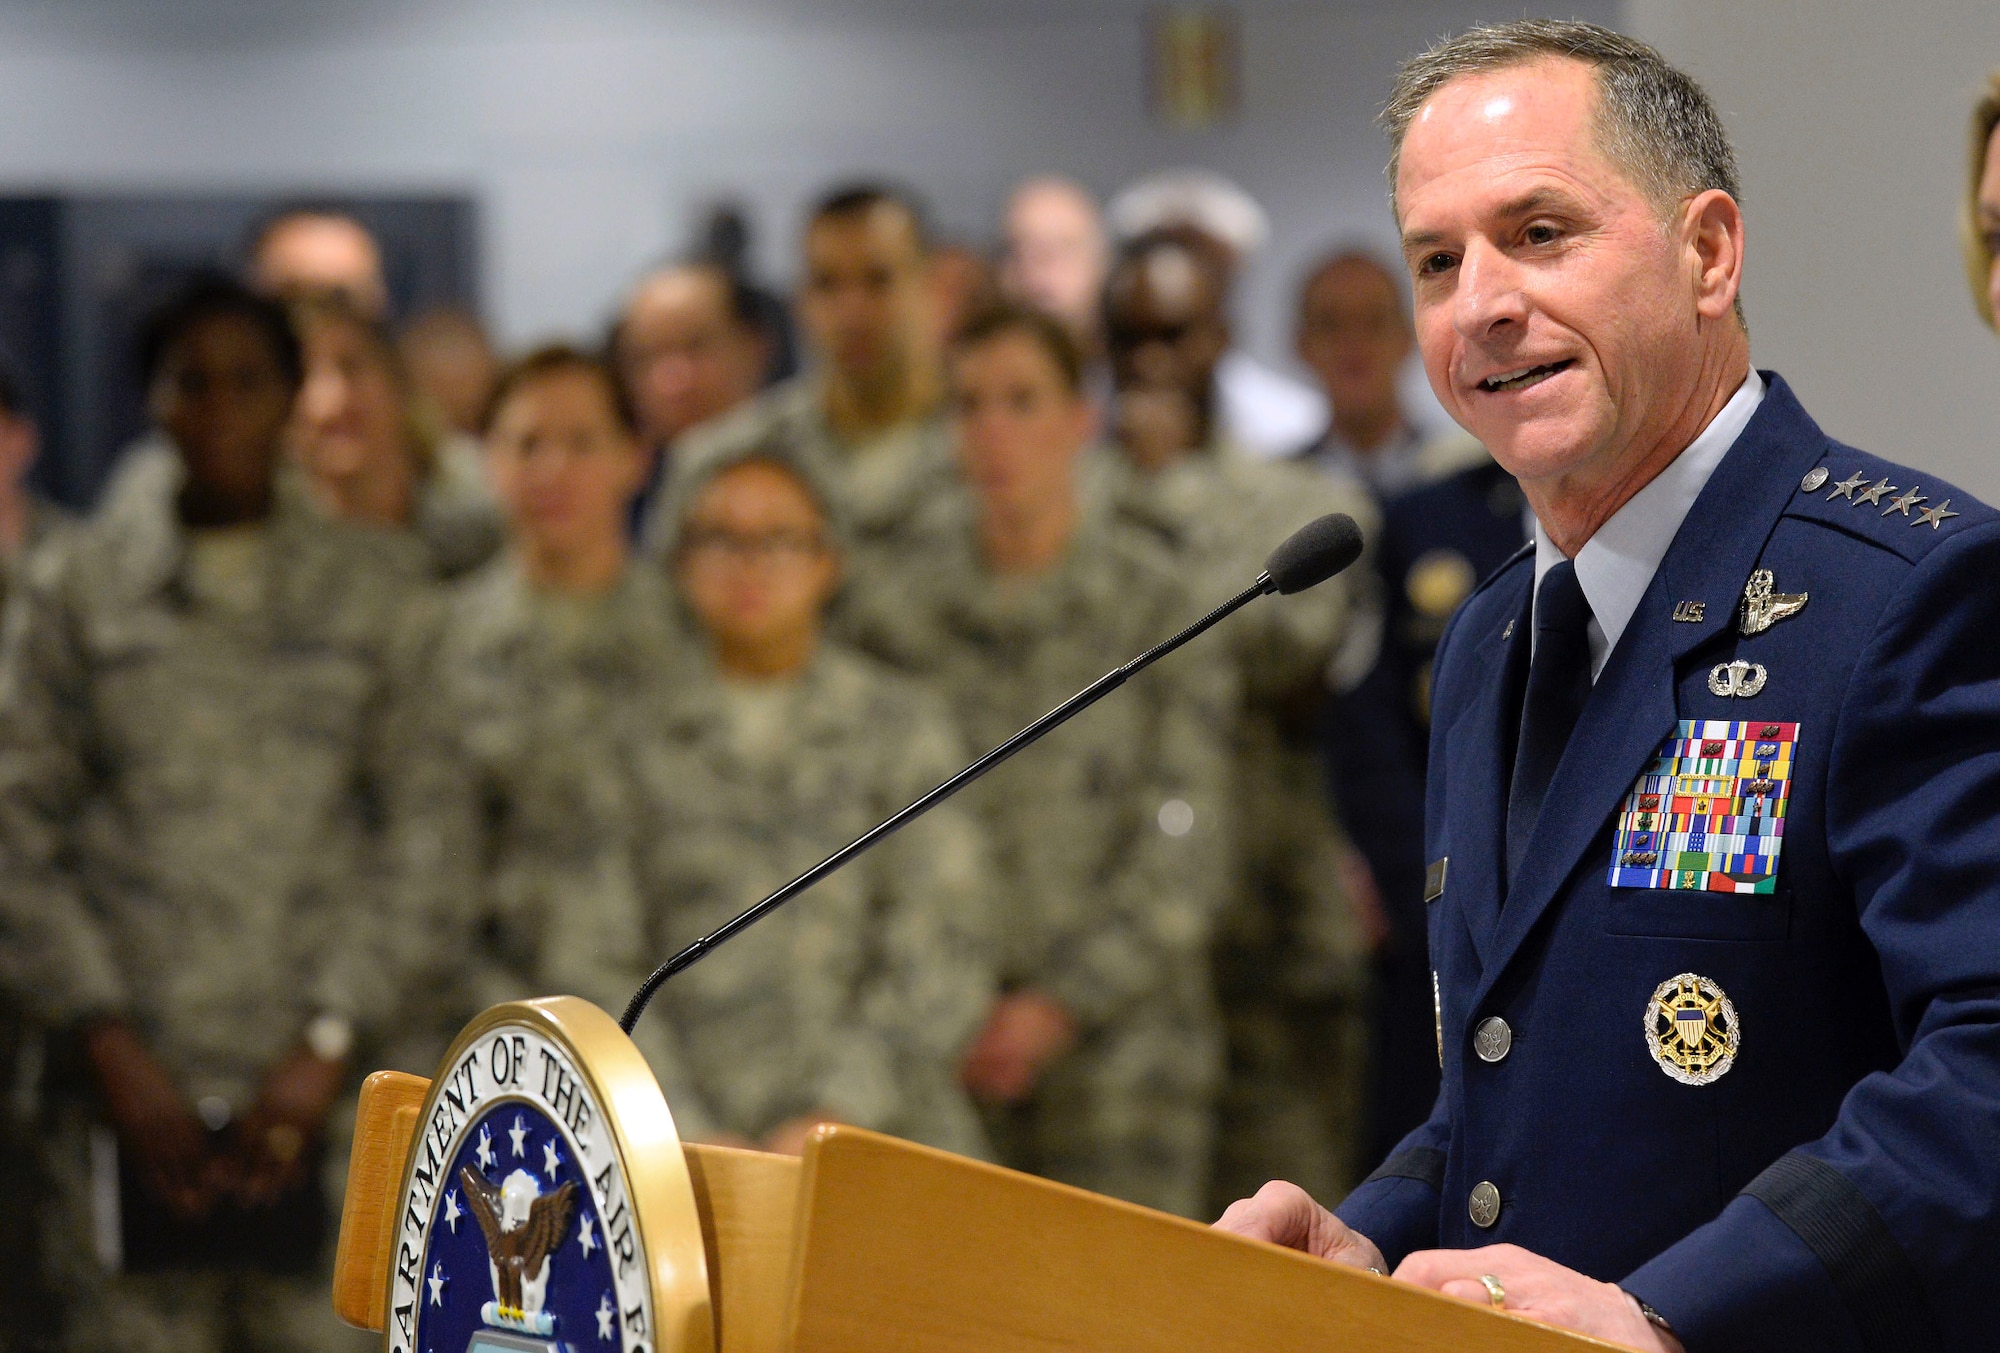 Air Force Chief of Staff Gen. David L. Goldfein announces Chief Master Sgt. Kaleth O. Wright as the 18th Chief Master Sergeant of the Air Force at the Pentagon Nov. 16, 2016. Wright will replace current Chief Master Sgt. of the Air Force James A. Cody as the Air Force’s senior enlisted member after Cody retires in early 2017.  (U.S. Air Force photo/Staff Sgt. Alyssa C. Gibson)